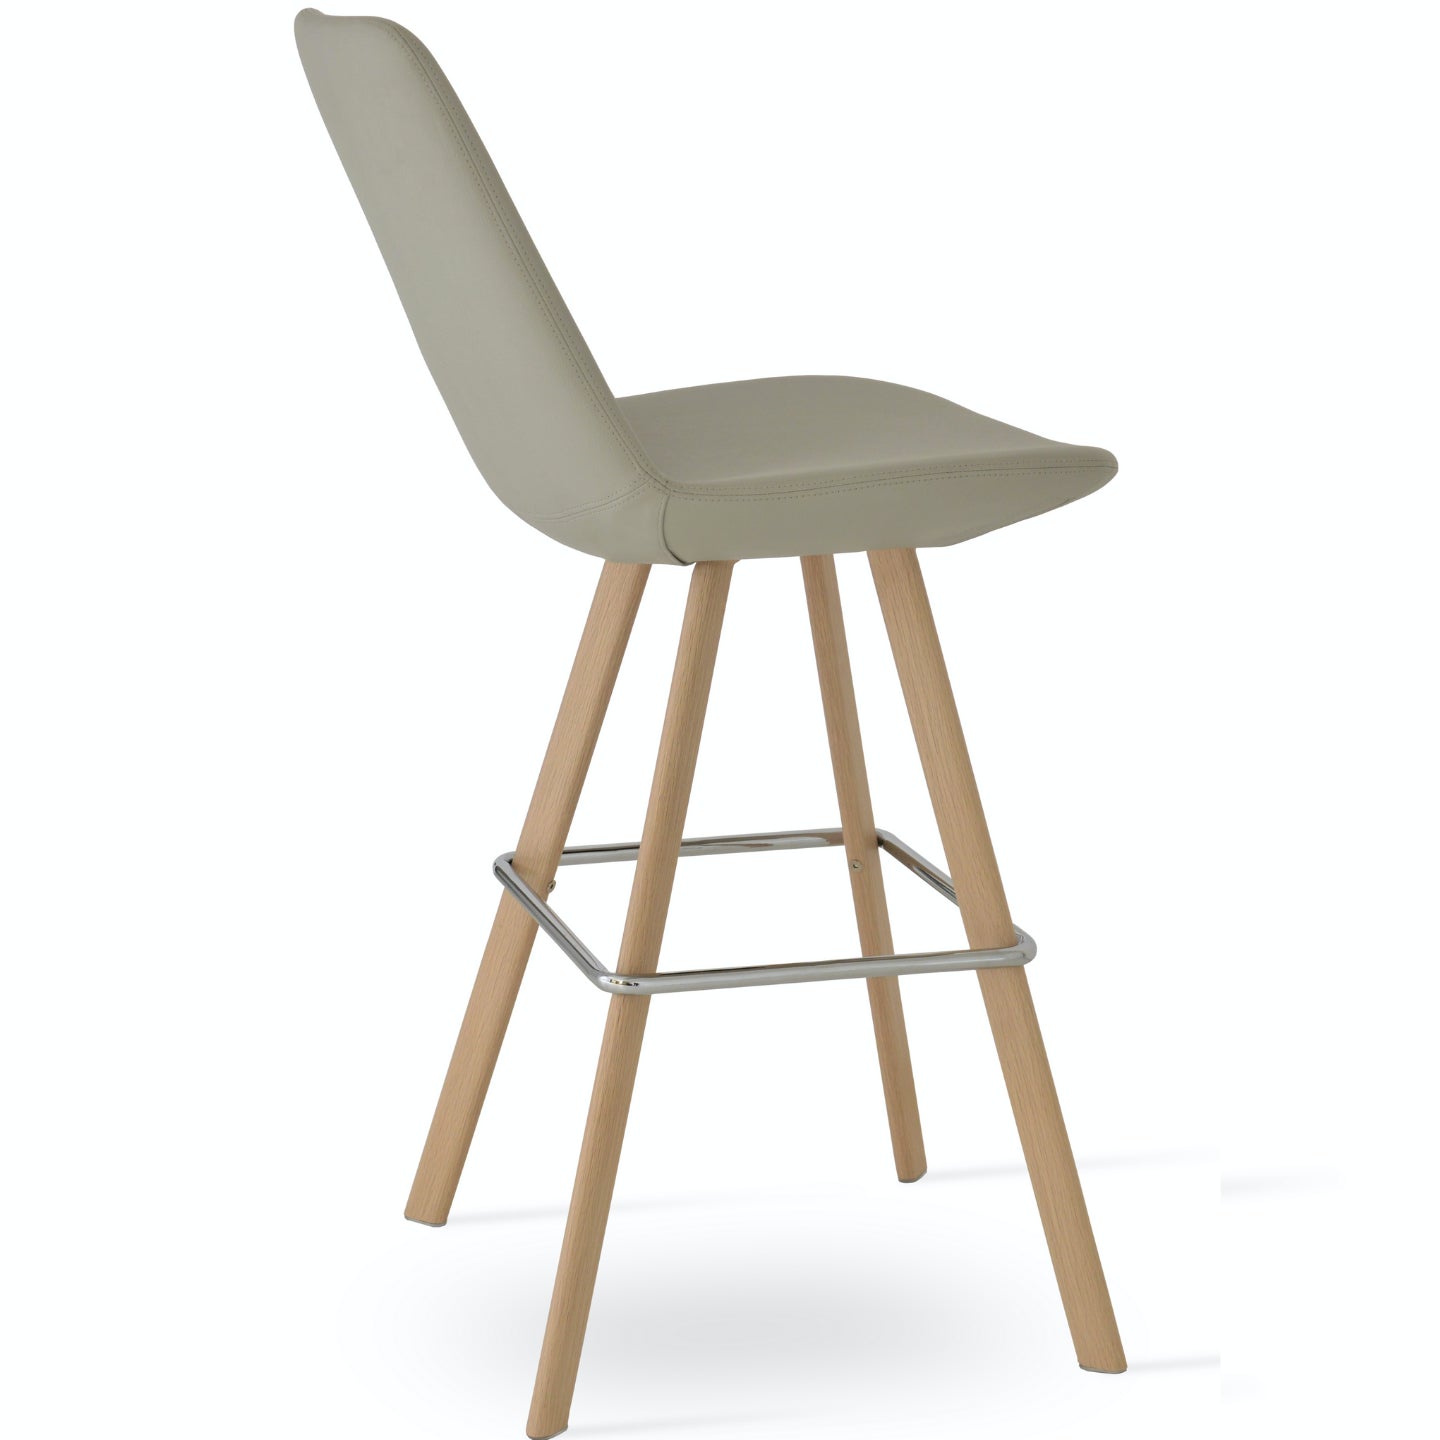 Soho Concept copy-of-eiffel-sword-natural-wood-leatherette-kitchen-counter-stool-in-light-grey